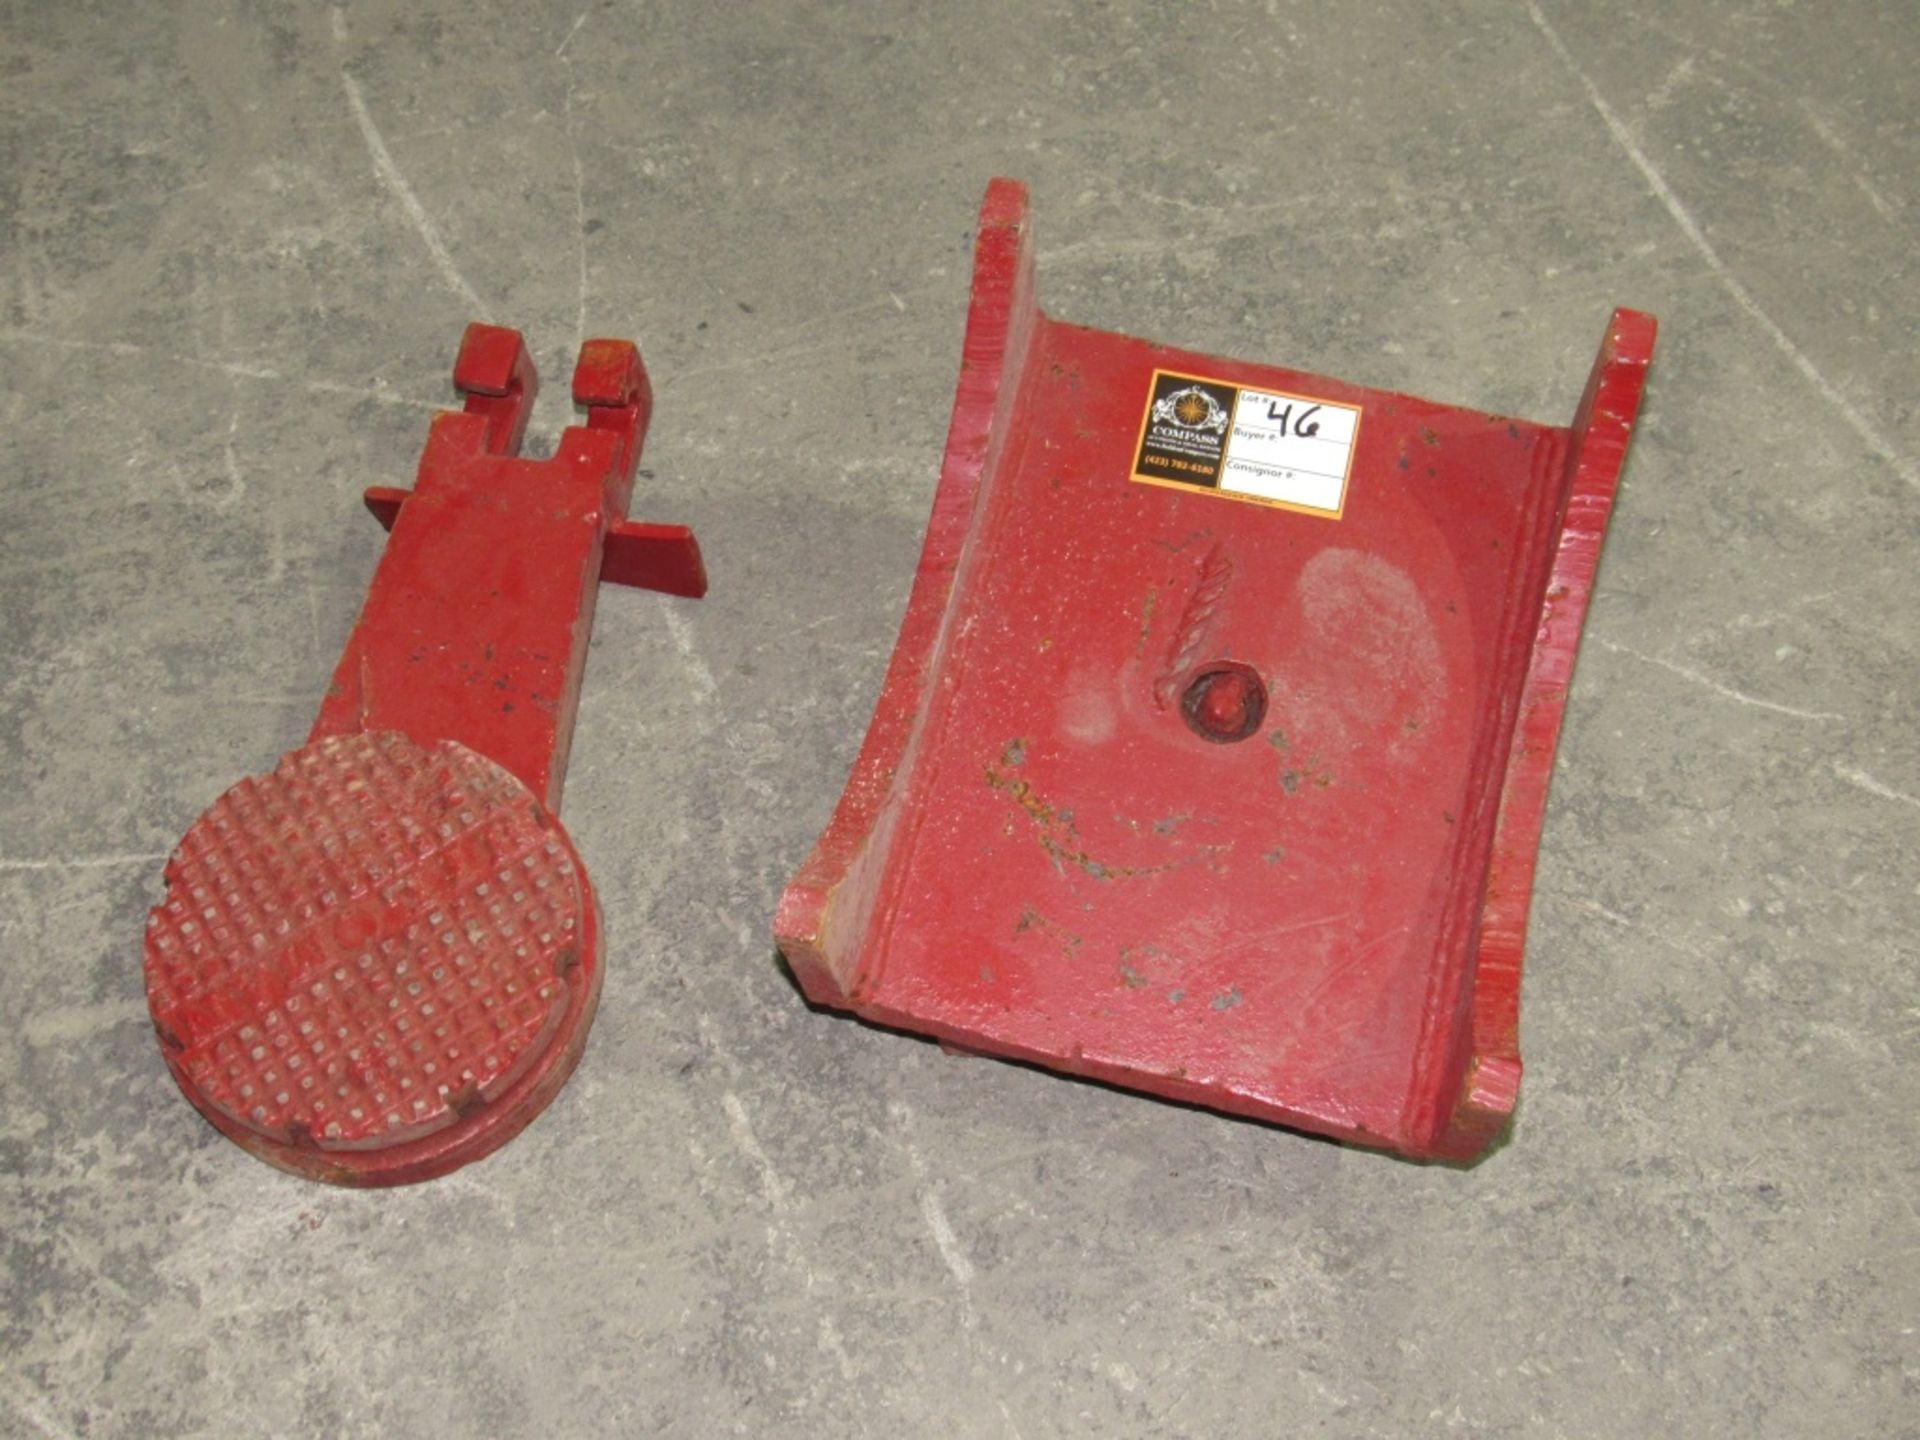 3 Ton Machinery Mover- MFR - Unknown 3 Ton Overall Dimensions - 13" x 9" x 4" - Image 2 of 6